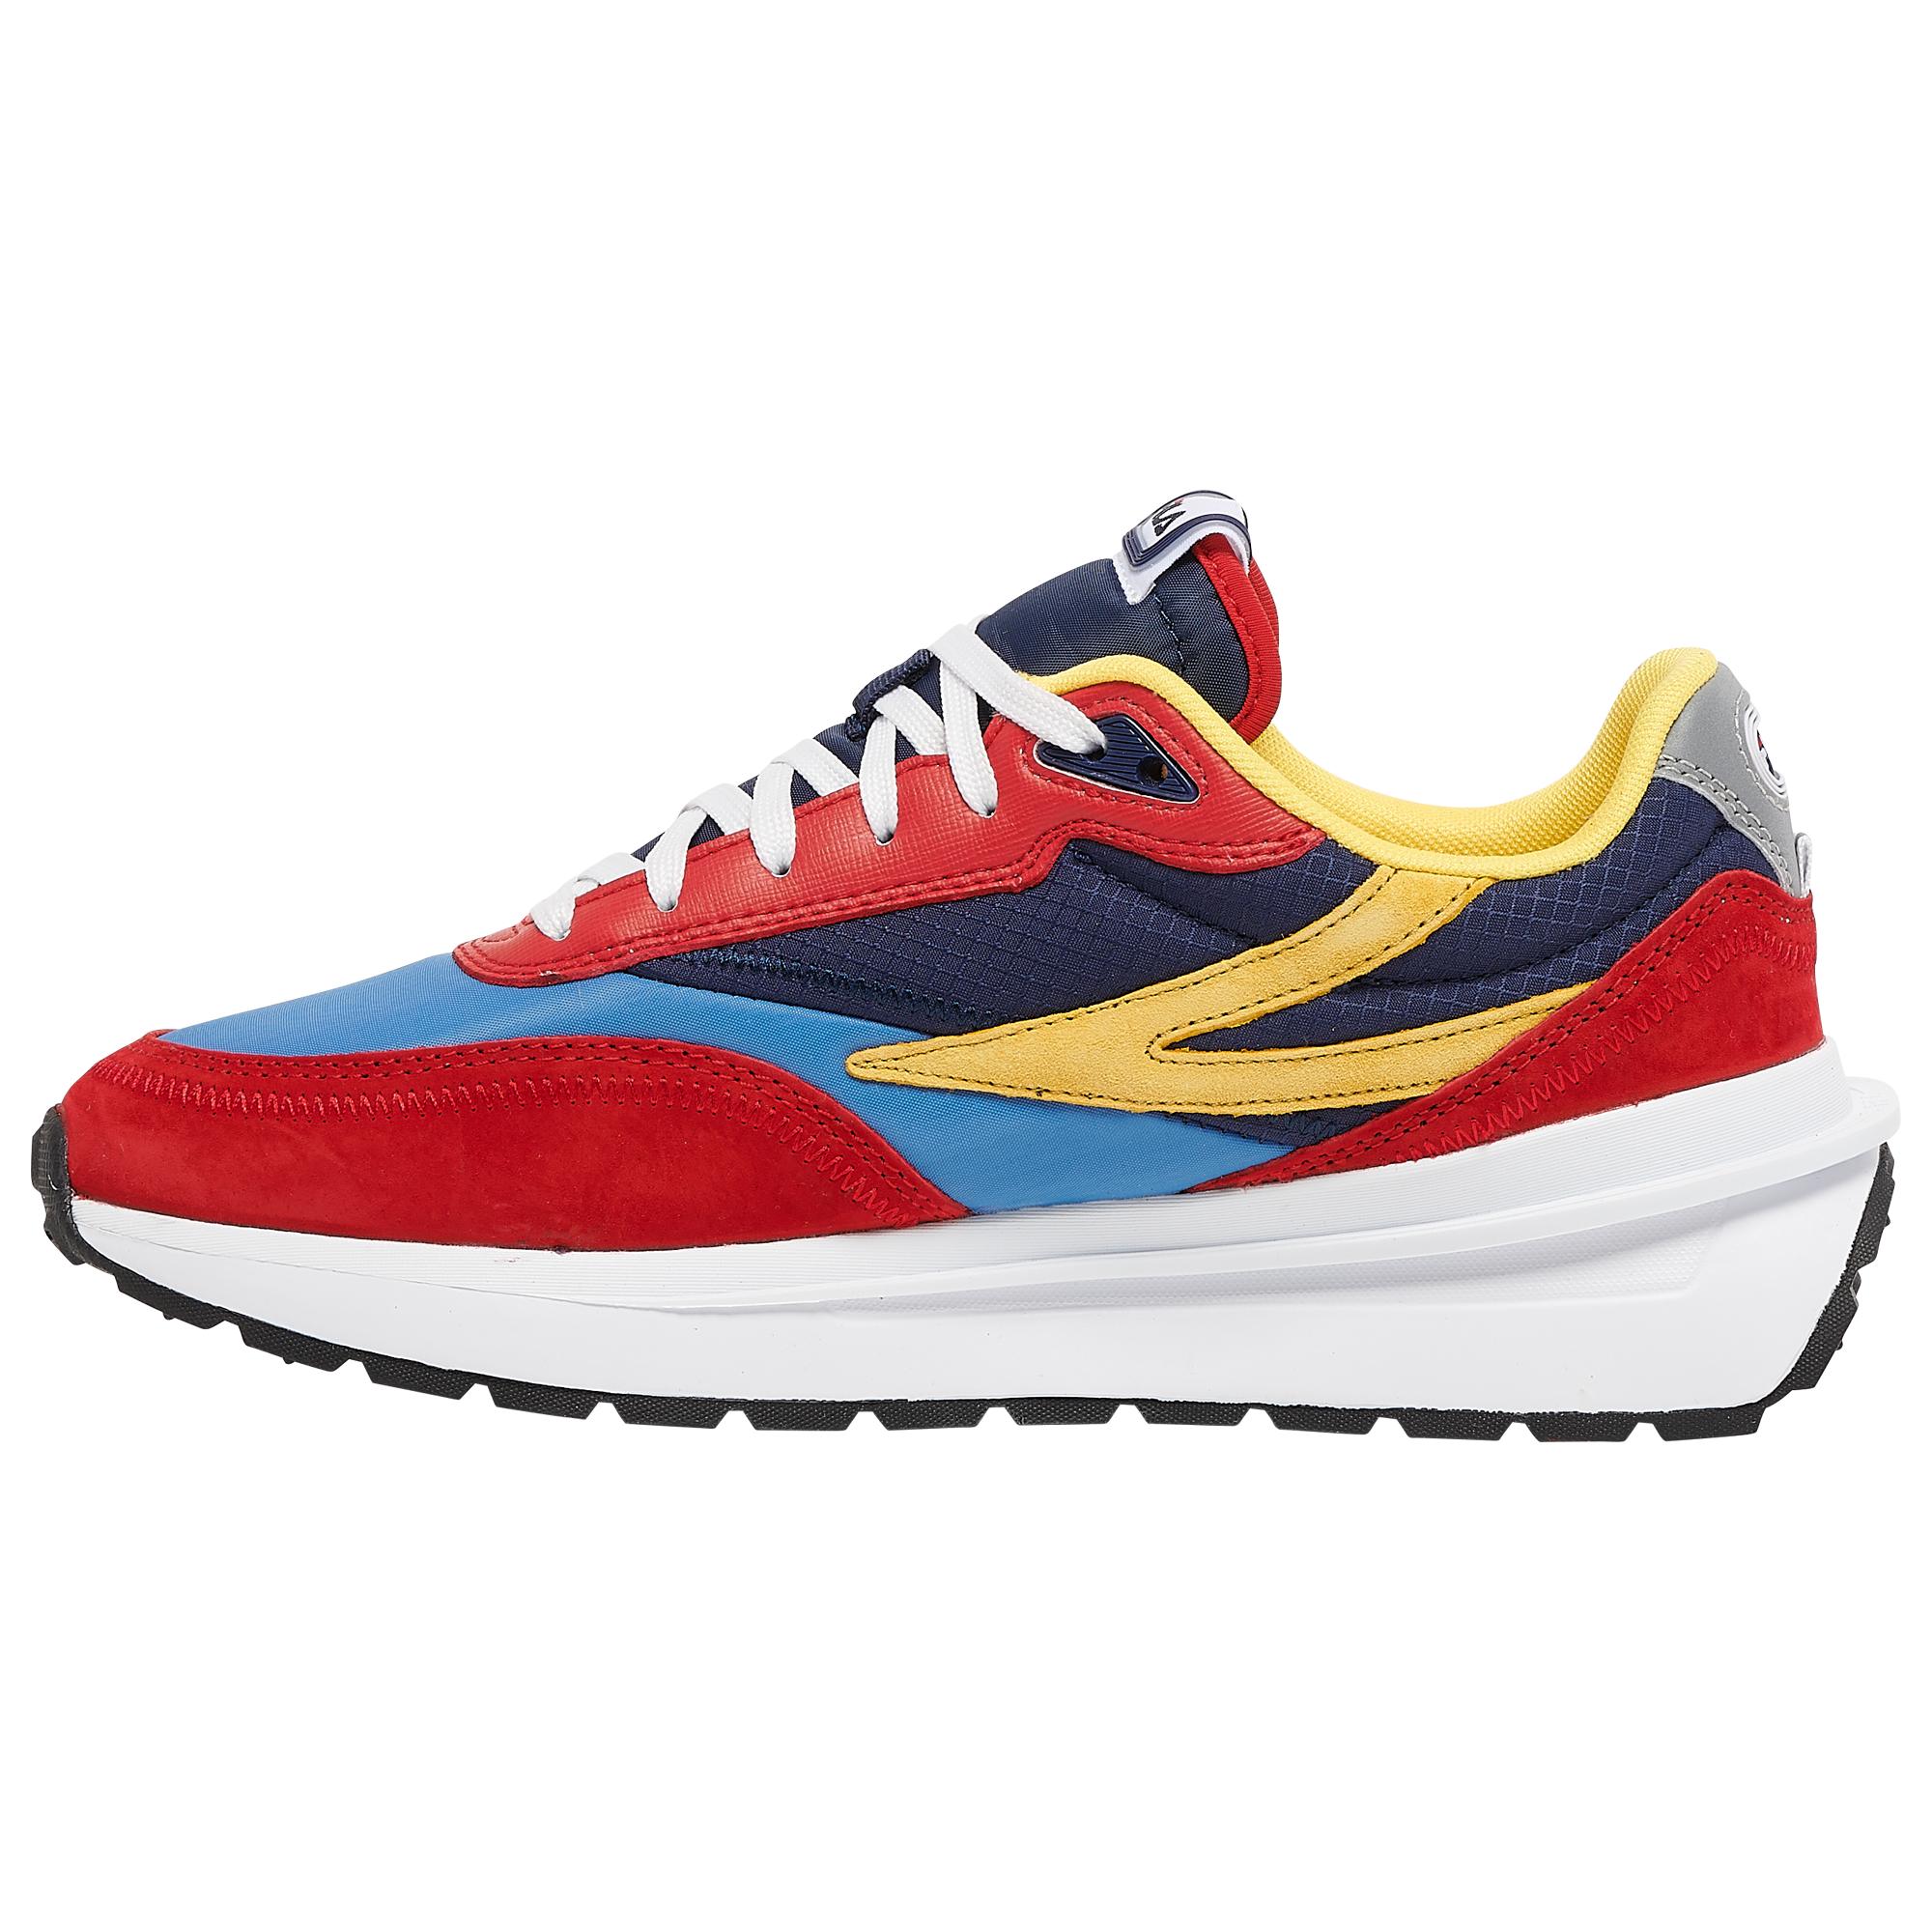 Fila Synthetic Renno - Running Shoes in Red/Blue/Yellow (Red) for 